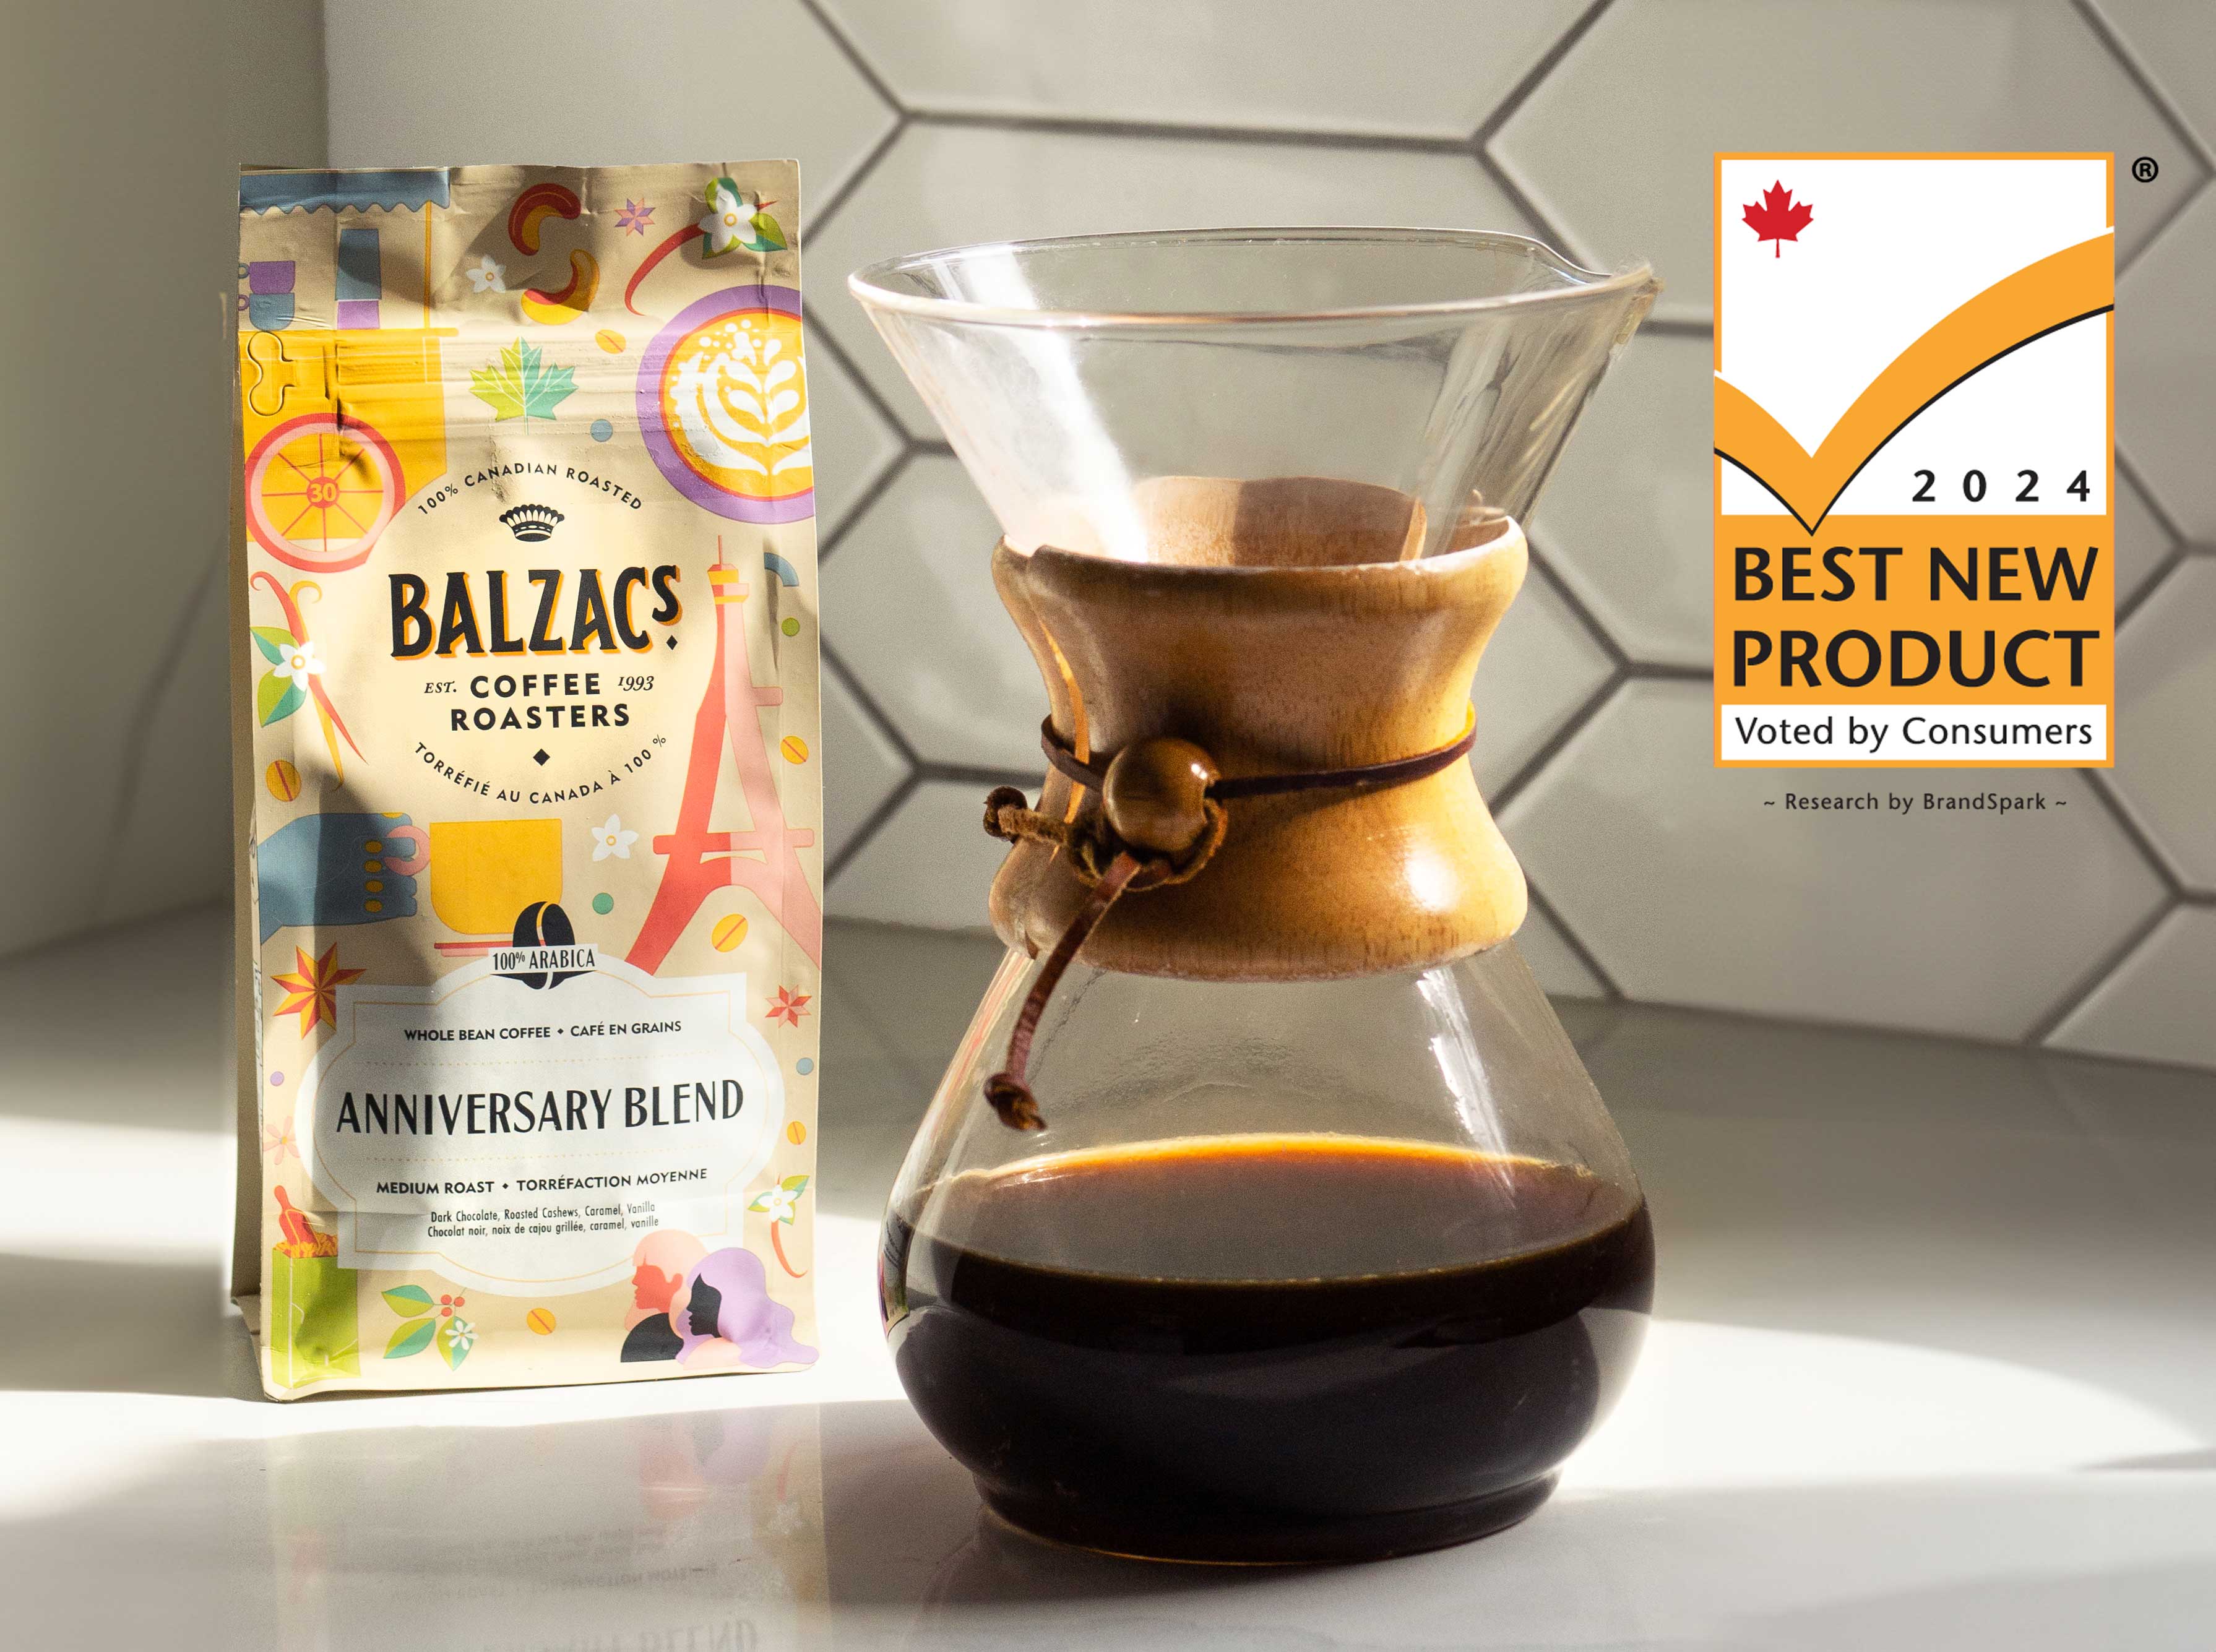 Balzac's Coffee Roasters Wins Best New Product Award for 30th Anniversary Blend!